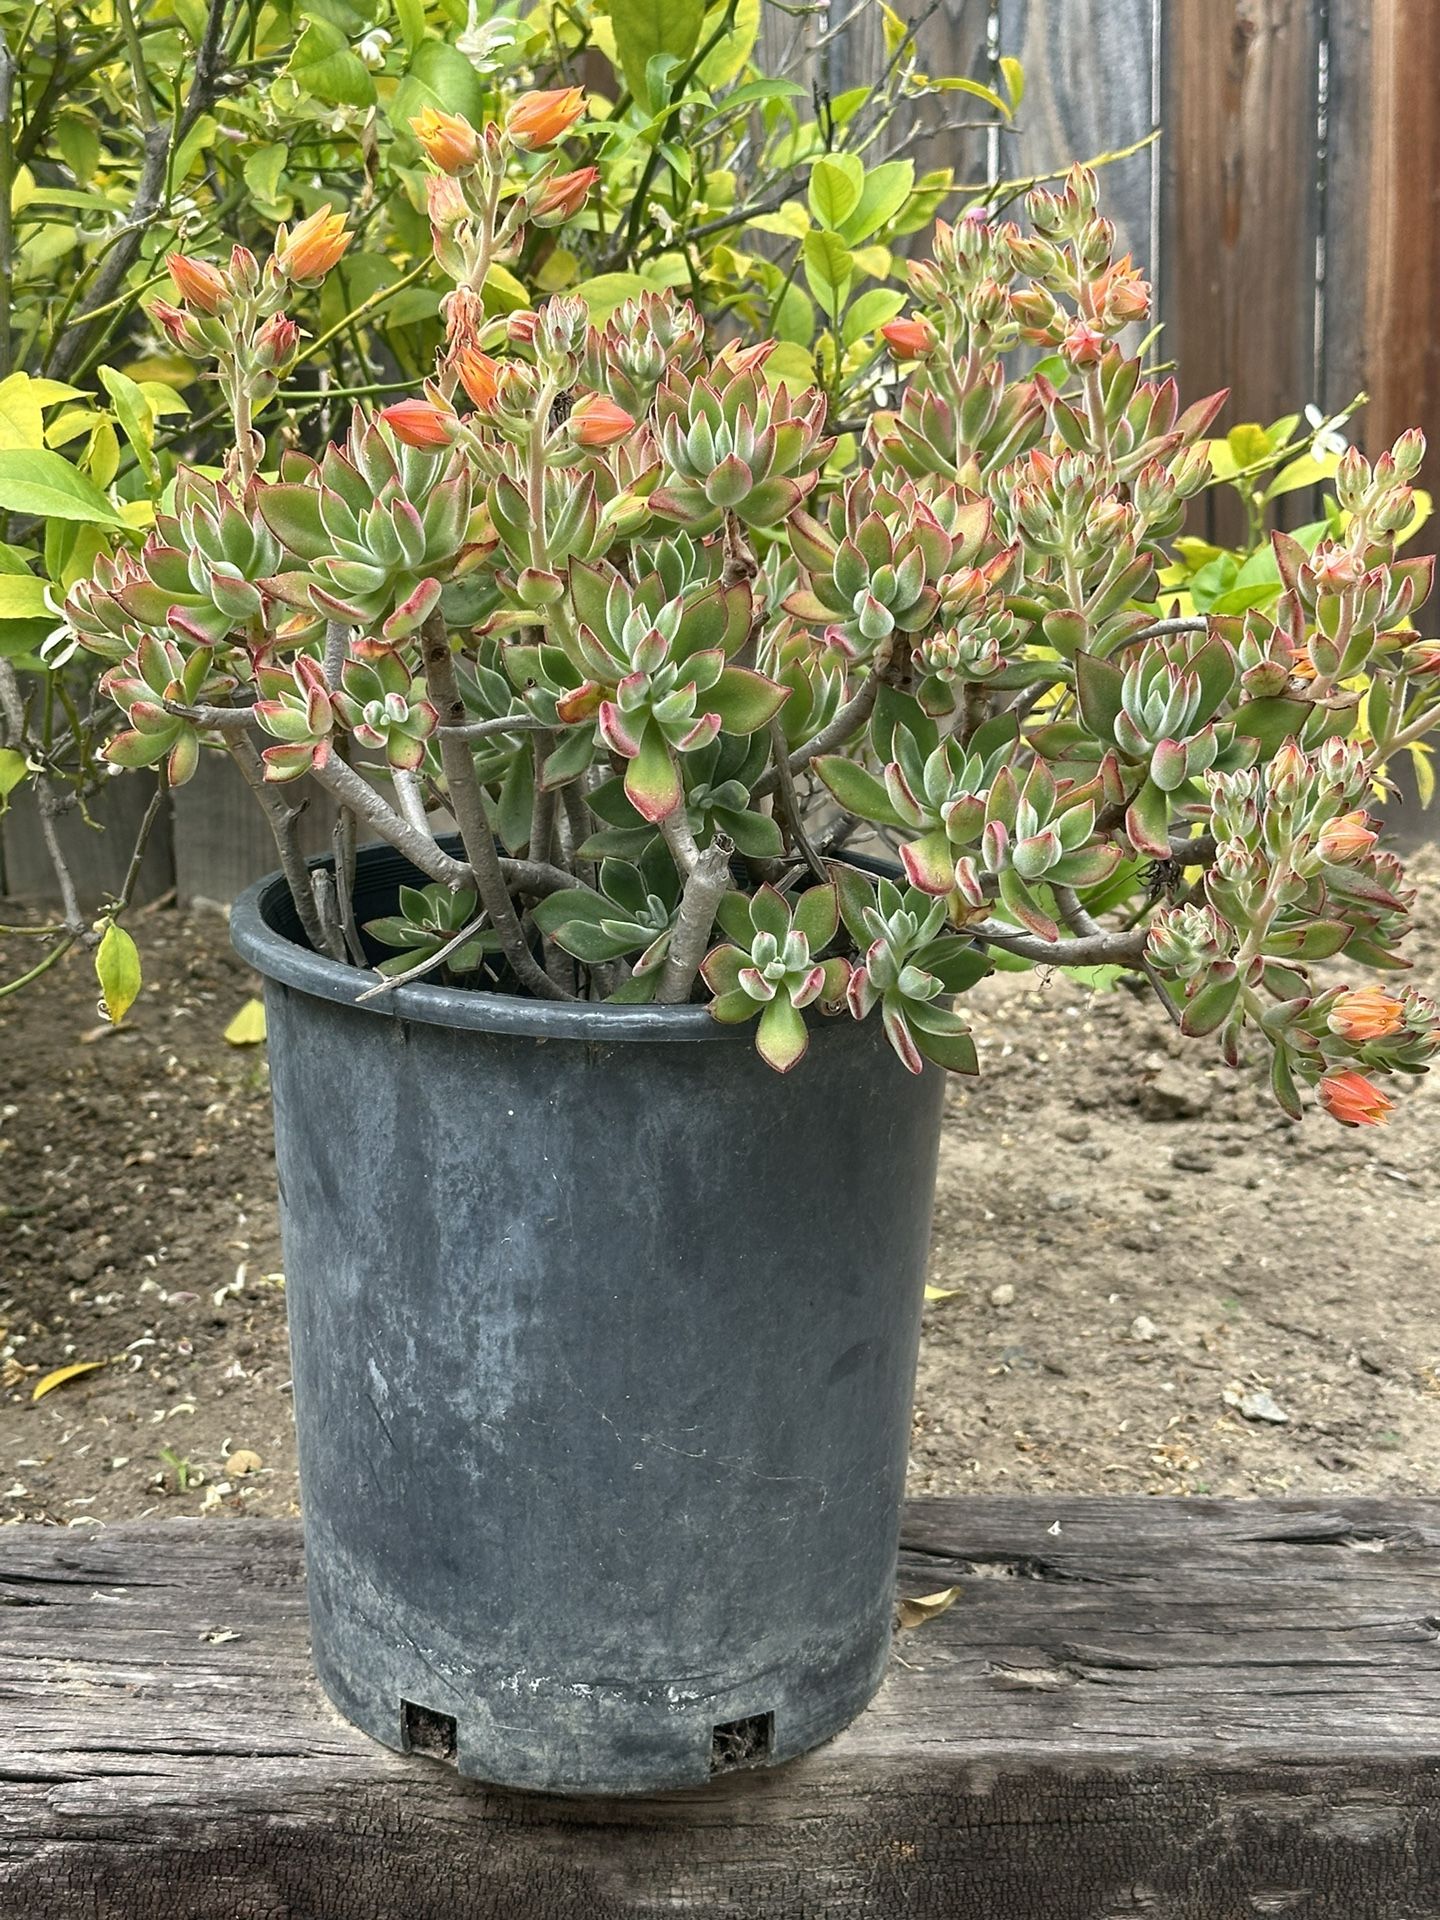 5 Gal Succulent Plant With Orange Flowers 